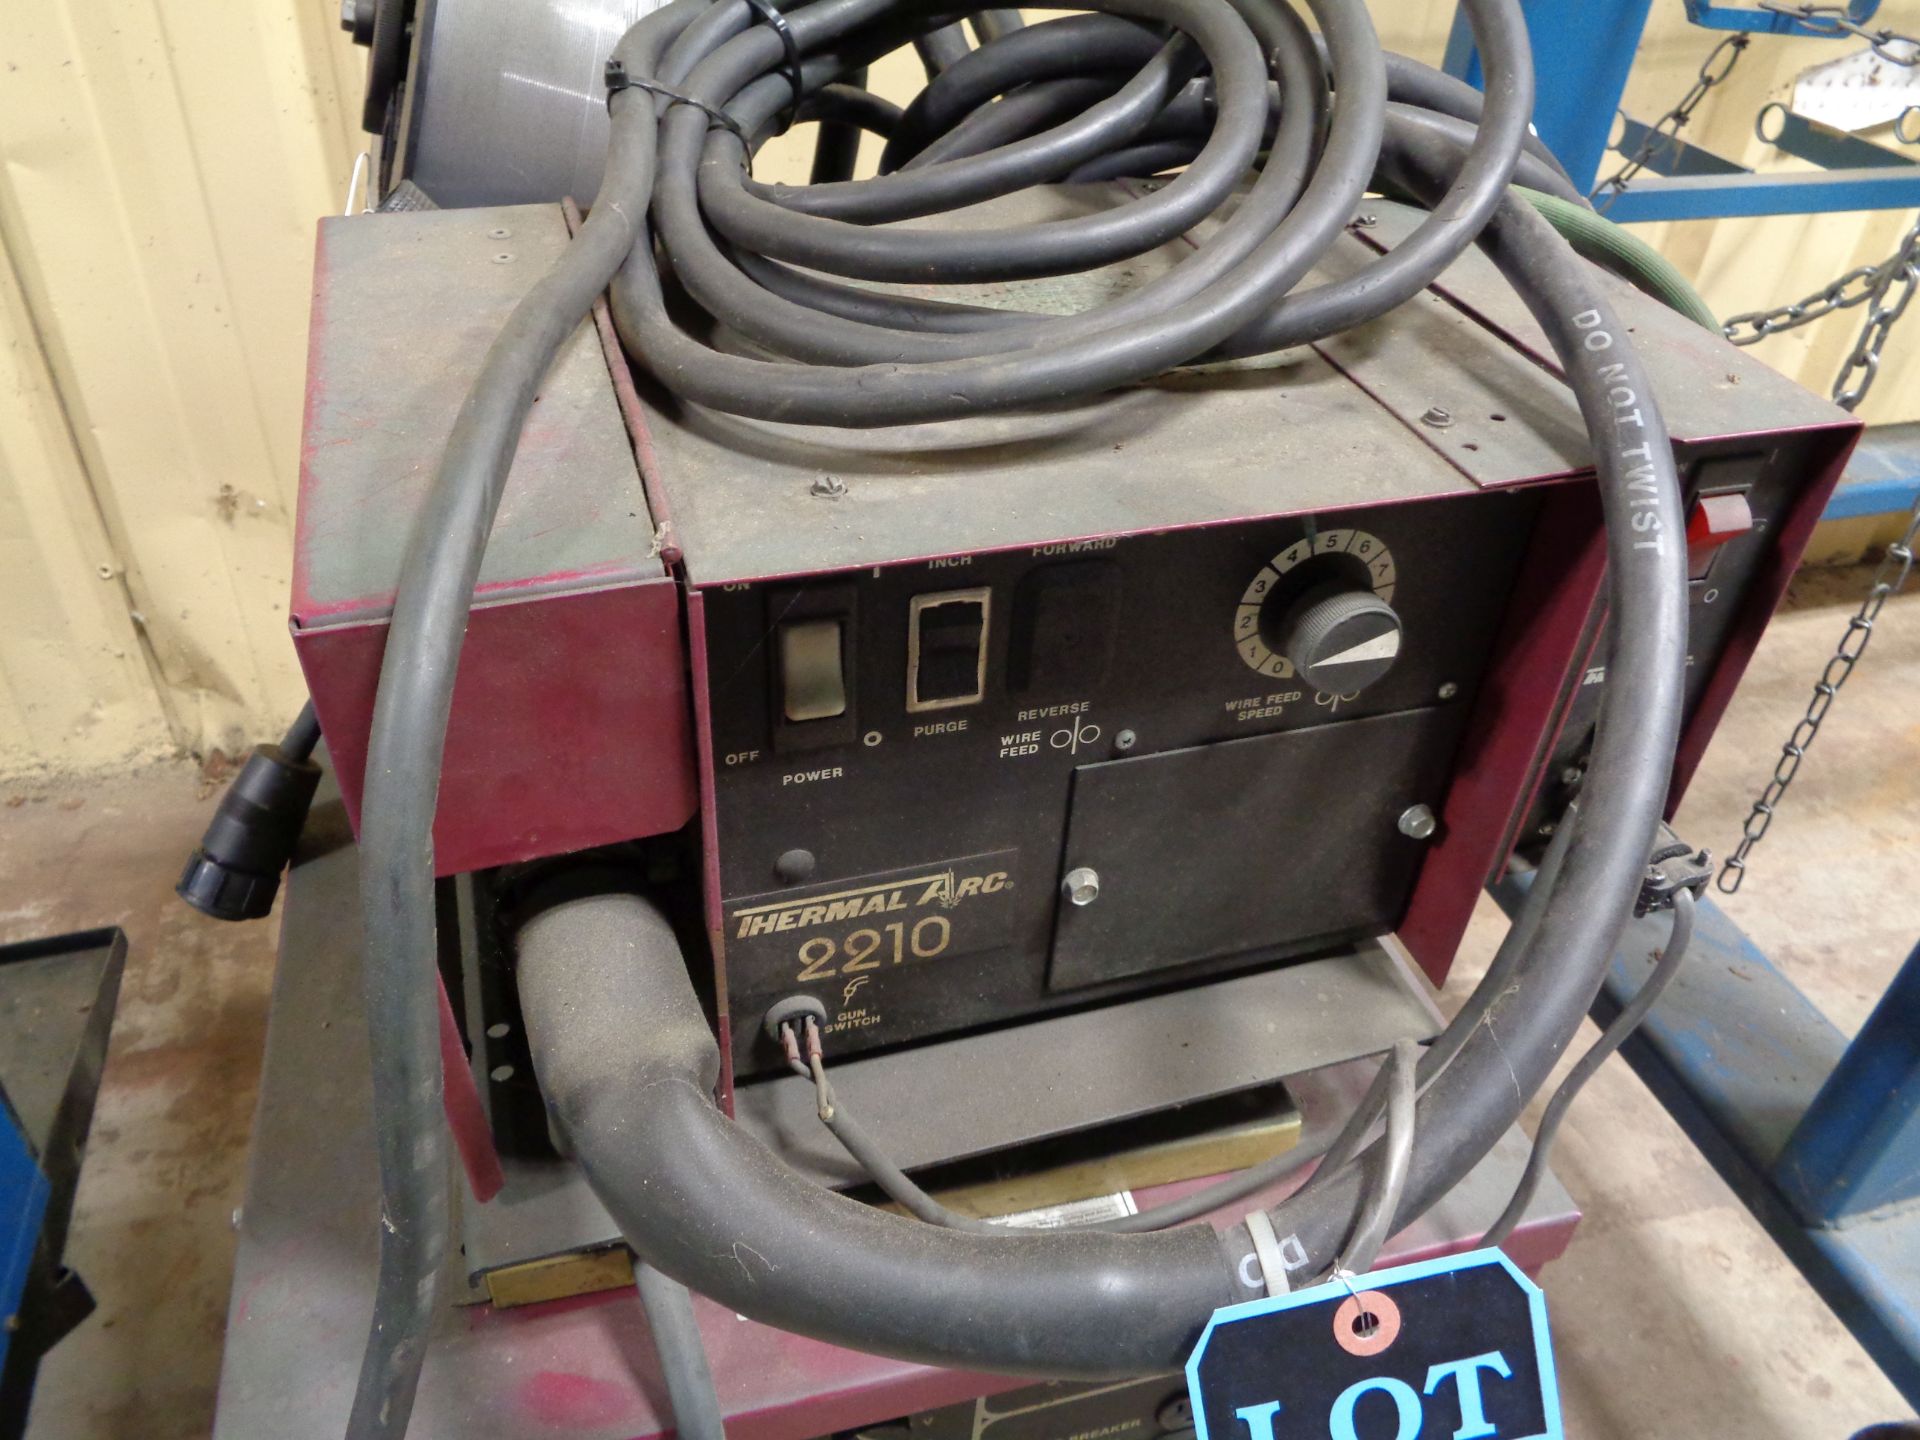 400 AMP THERMAL ARC FABSTAR 4030 CONSTANT VOLTAGE DC POWER SOURCE; S/N 199P920734, WITH THERMAL - Image 3 of 4